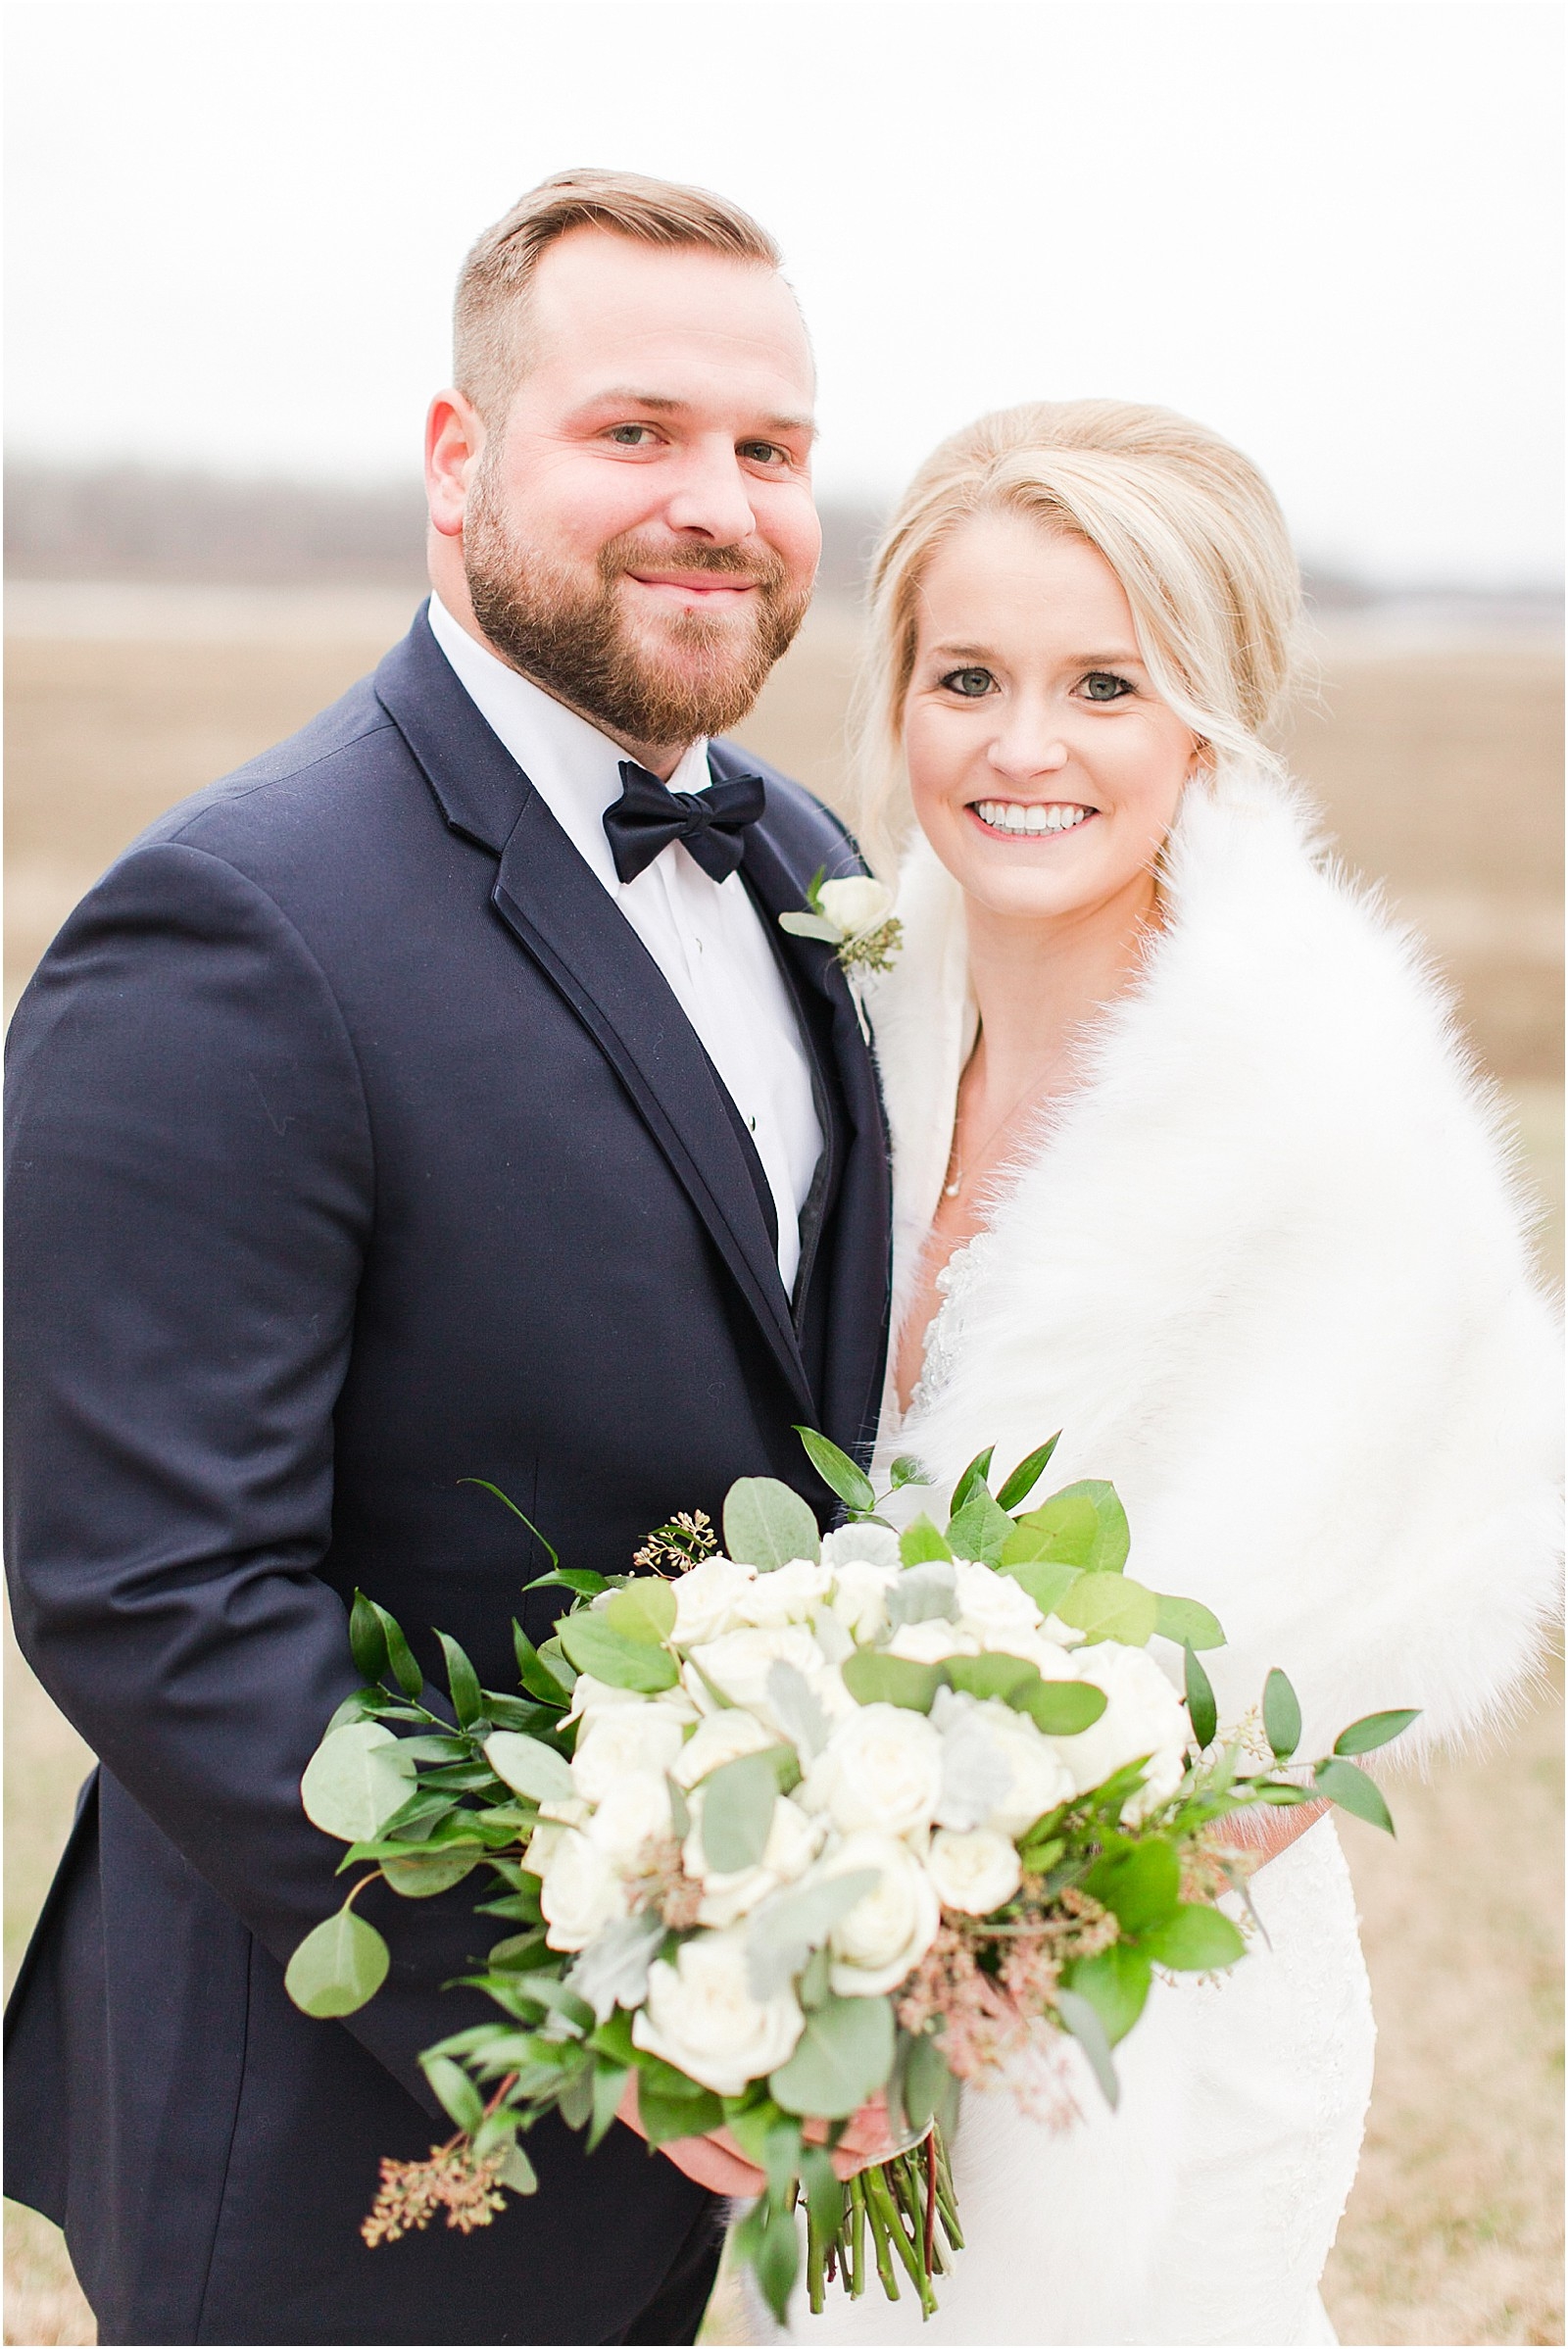 A Classic Winter Wedding in New Harmony | Rachel and Ryan | Bret and Brandie Photography 0105.jpg